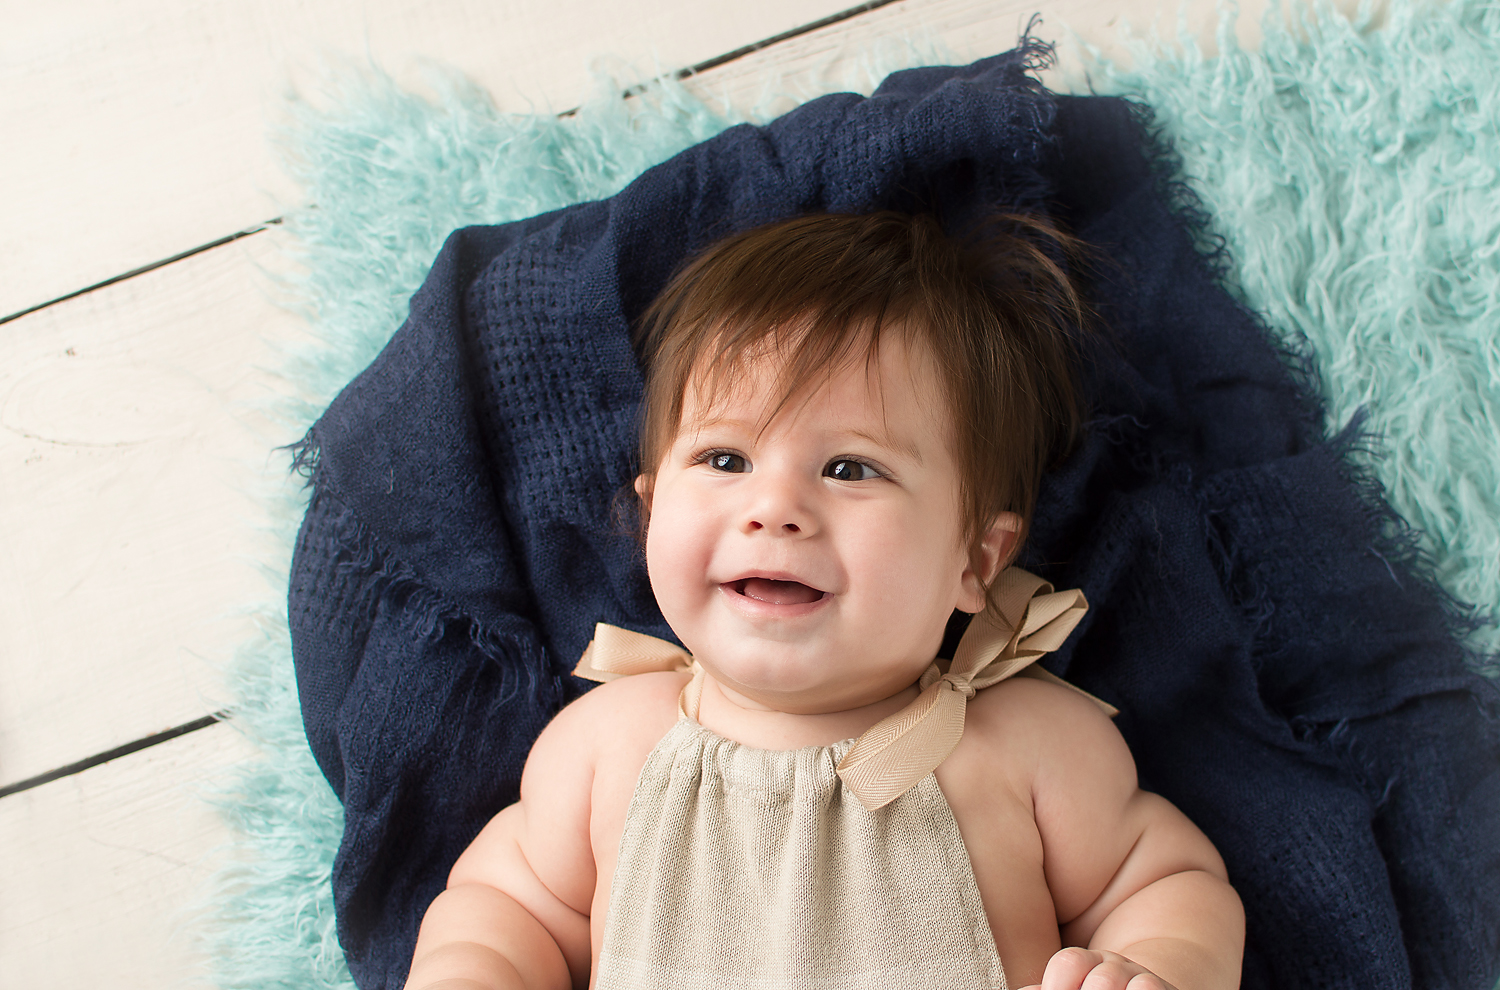 November 6 2015-Tabatha Sue Photography-Parma Ohio-Blue Fur-Navy Layer for Photo Session-White Wooden Backdrop-Baby Boy Brown Eyes-Big Smile-Baby Pictures.jpg